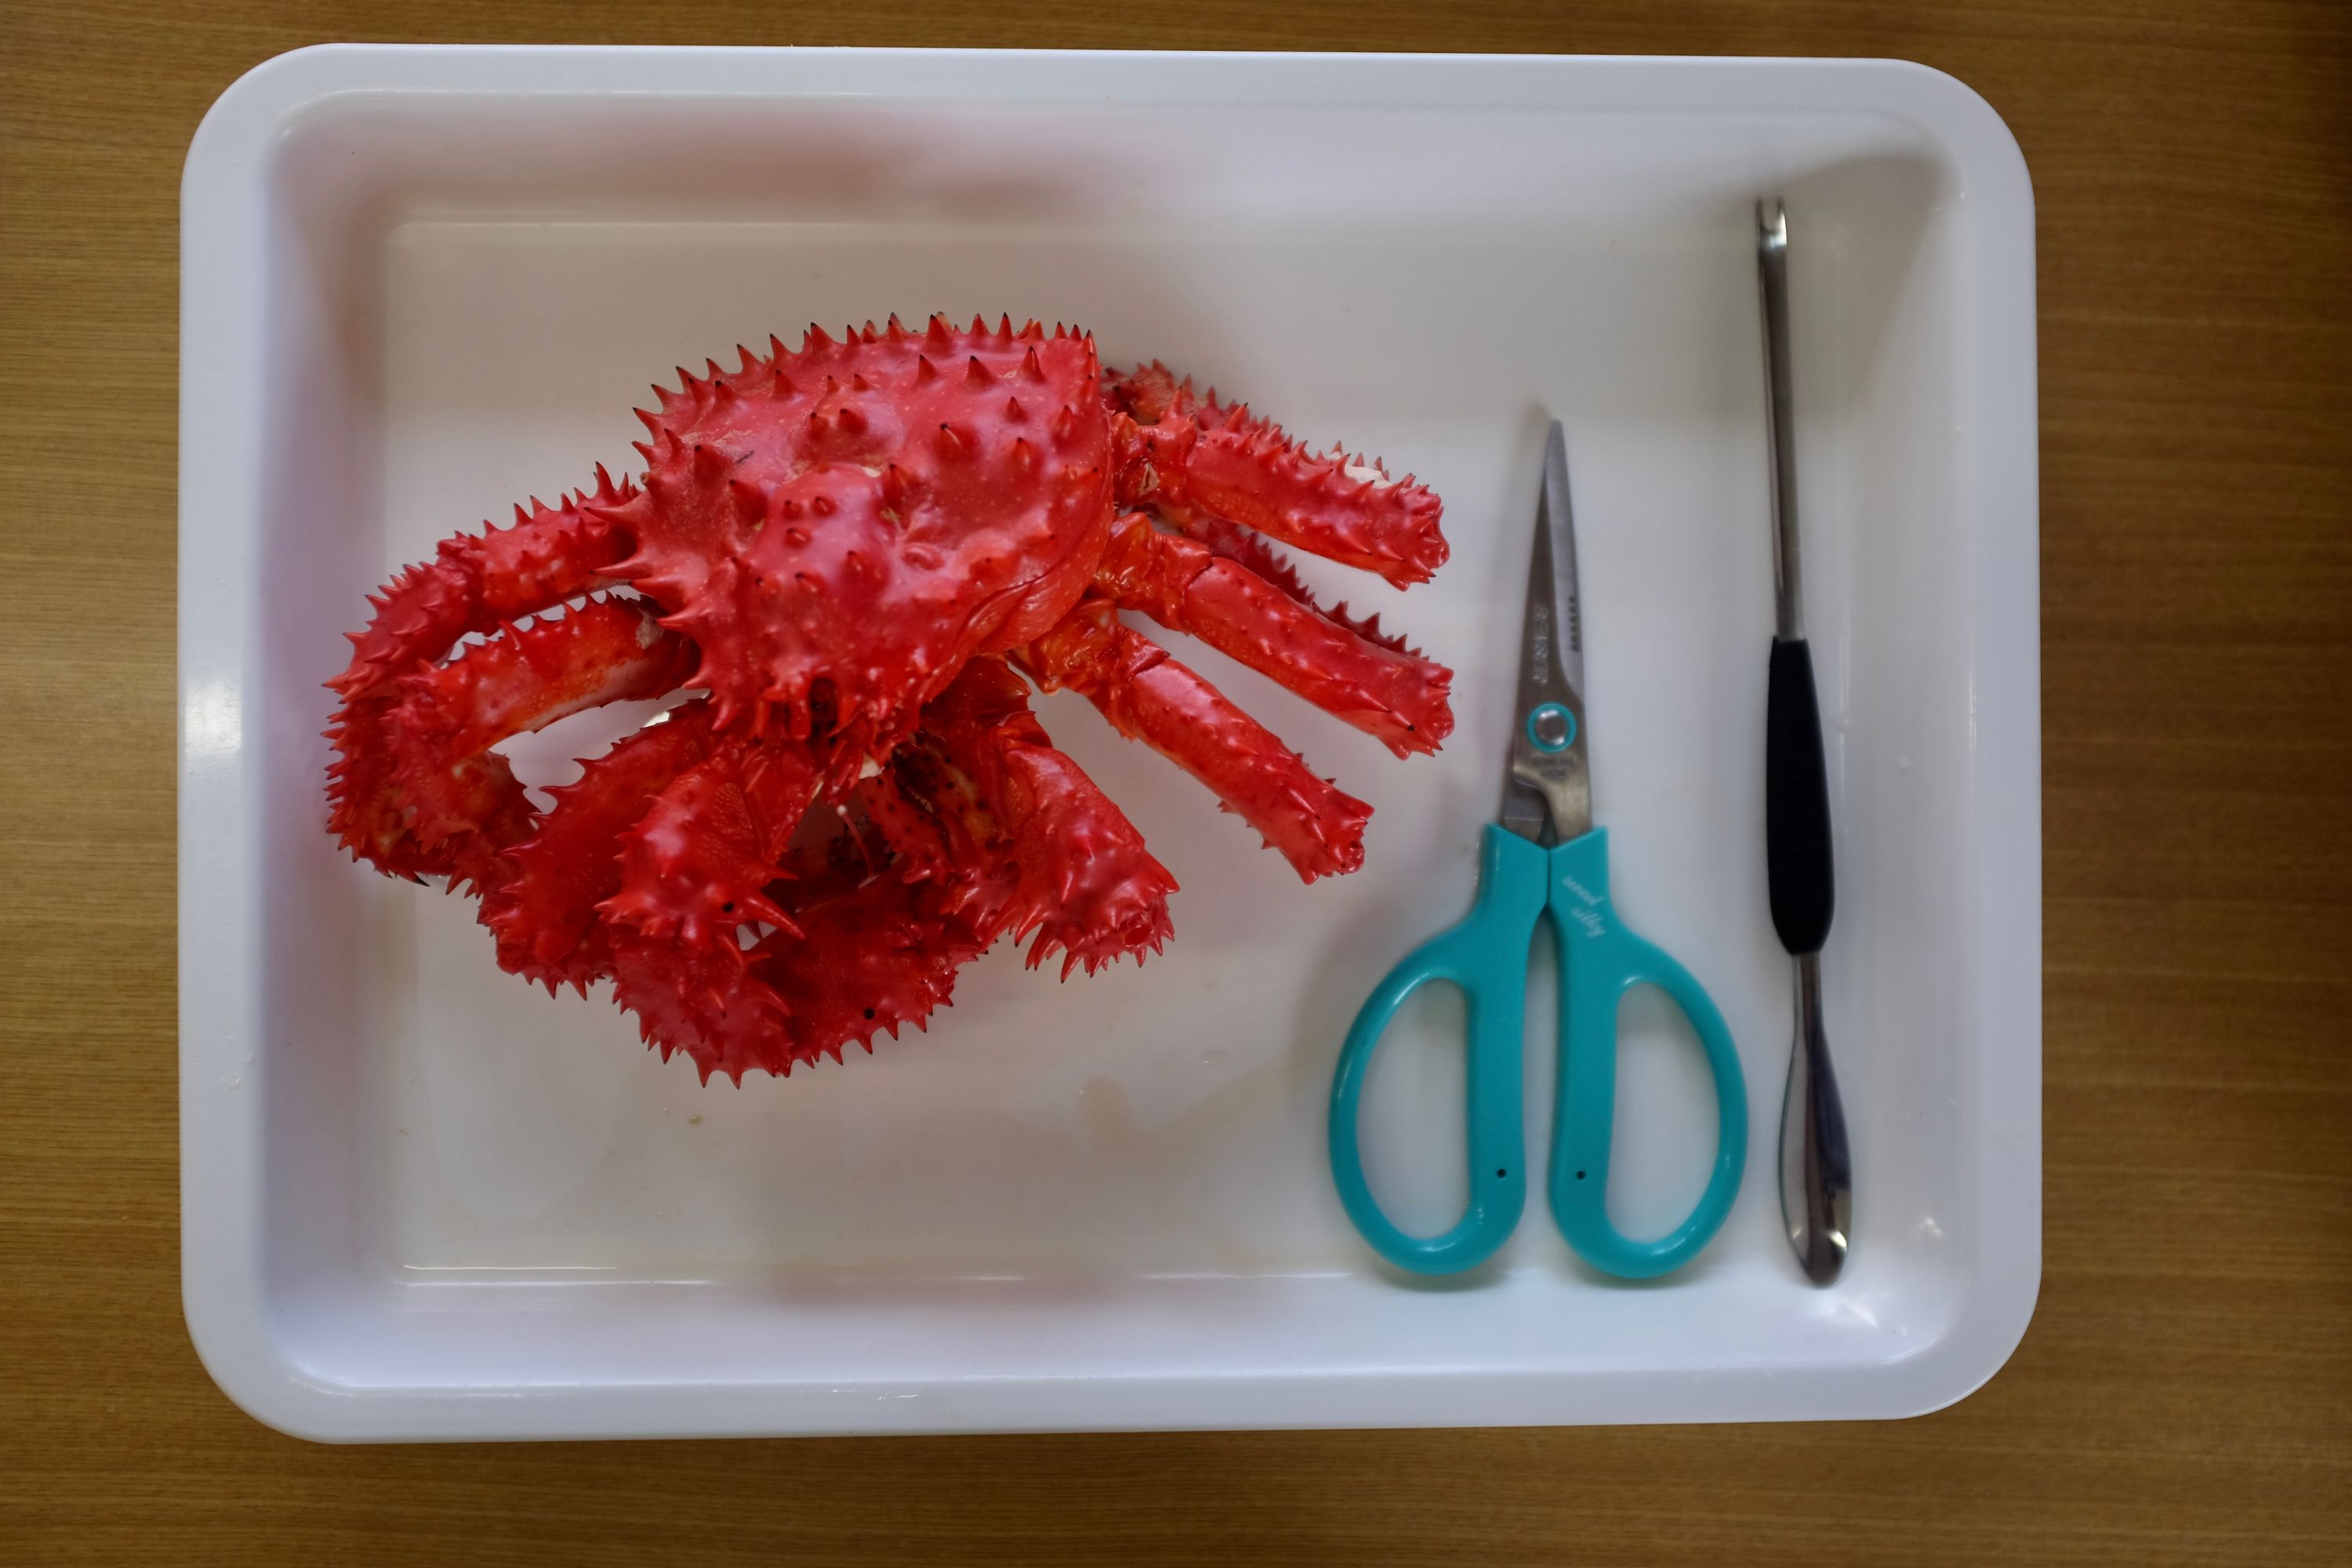 The same crab, now cooked and served on a white plastic plate with a pair of green-blue scissors.